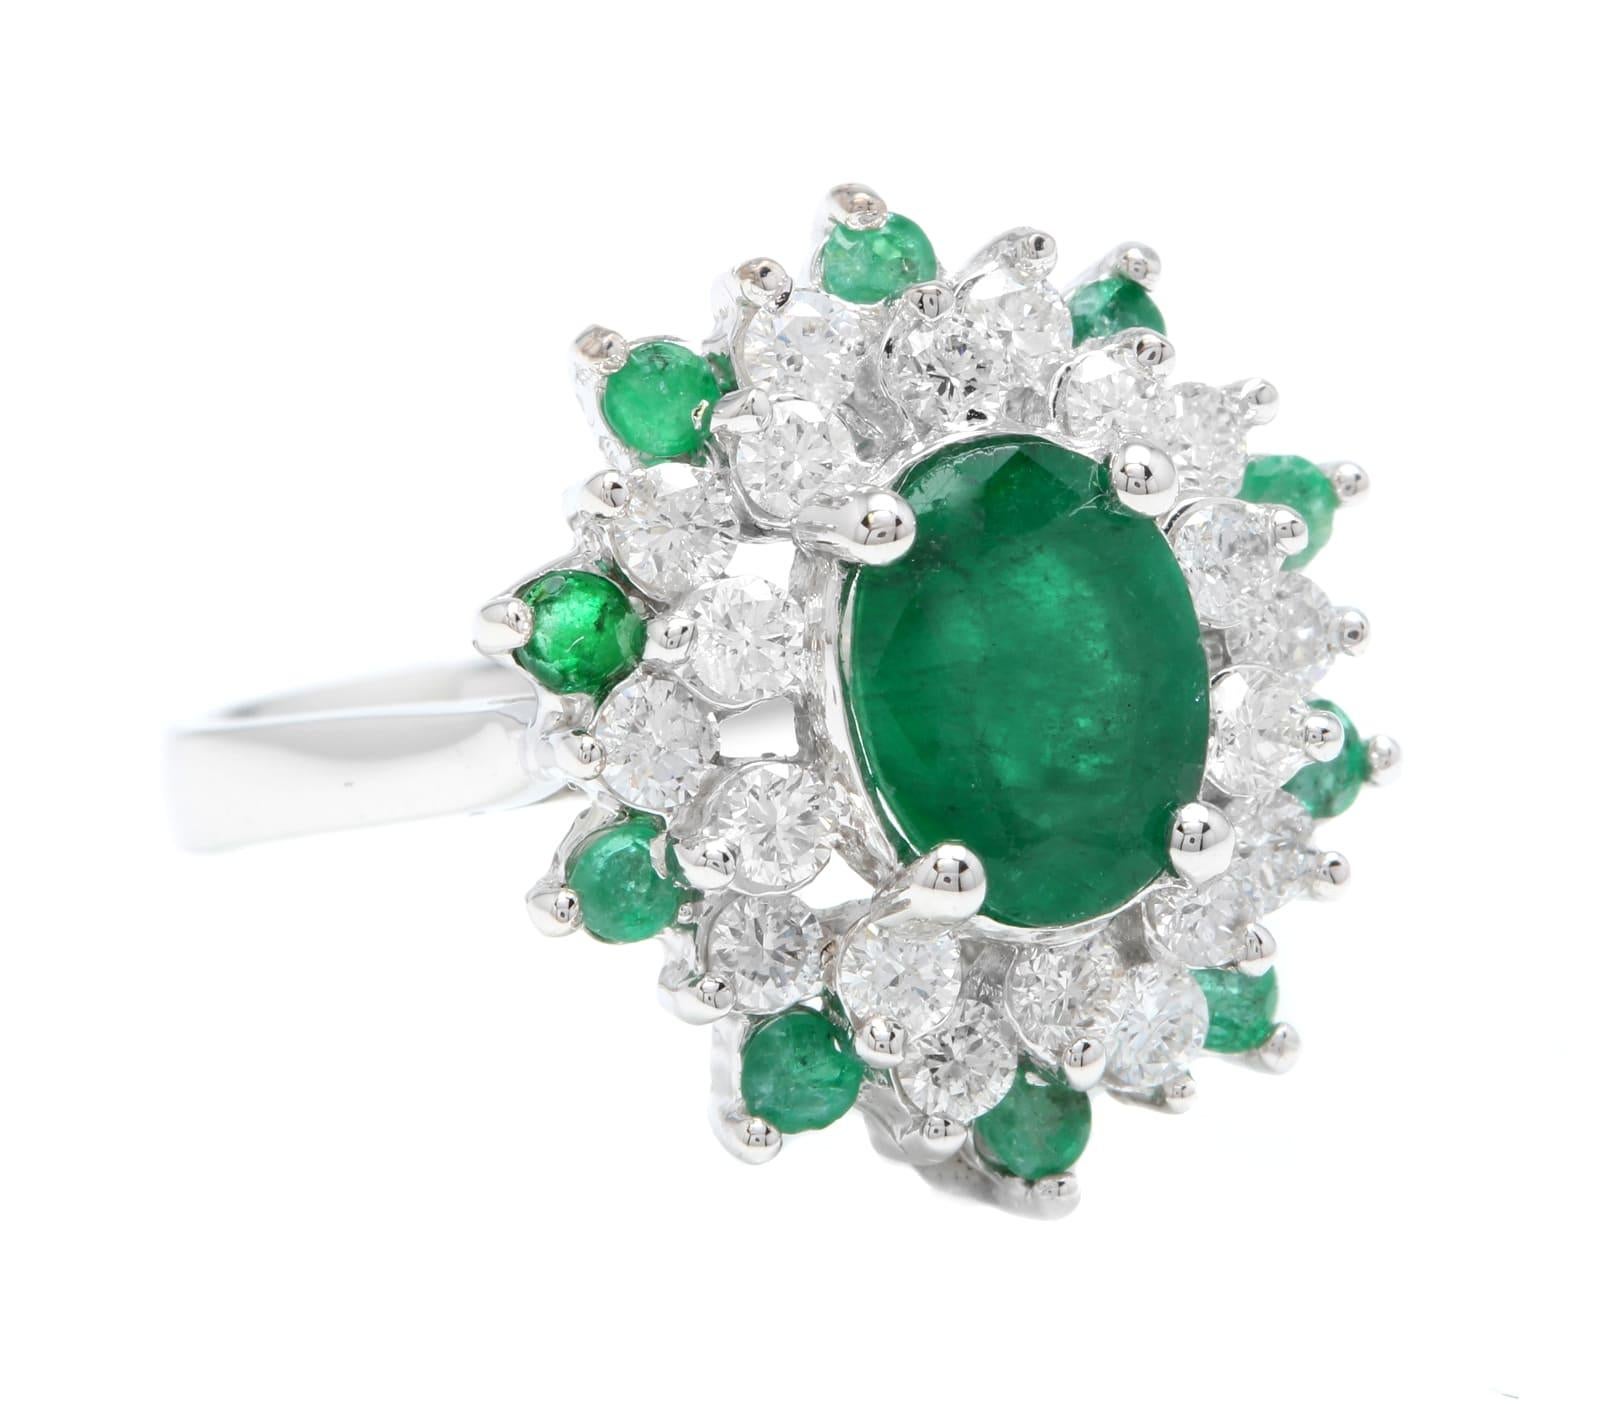 3.30 Carats Exquisite Emerald and Diamond 14K Solid White Gold Ring

Total Emerald Weight is: Approx. 2.50 Carats

Emerald Measures: Approx. 9.00 x 7.00mm

Natural Round Diamonds Weight: Approx. 0.80 Carats (color G-H / Clarity SI1-SI2)

Ring size: